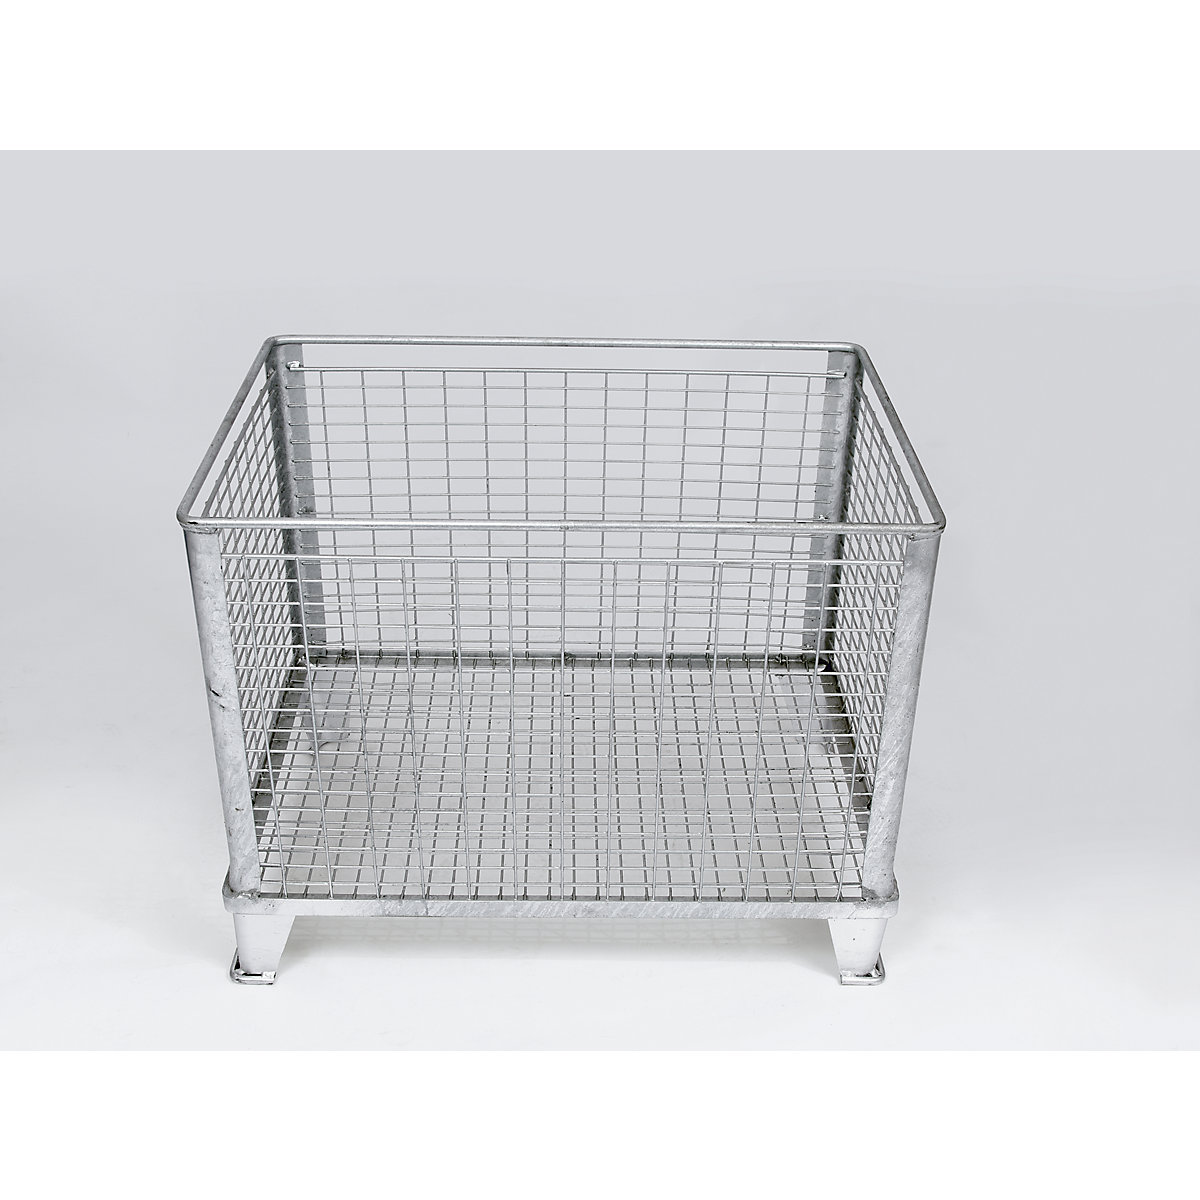 Stacking basket for heavy items, large mesh size, external dims. LxWxH 815 x 565 x 625 mm-6